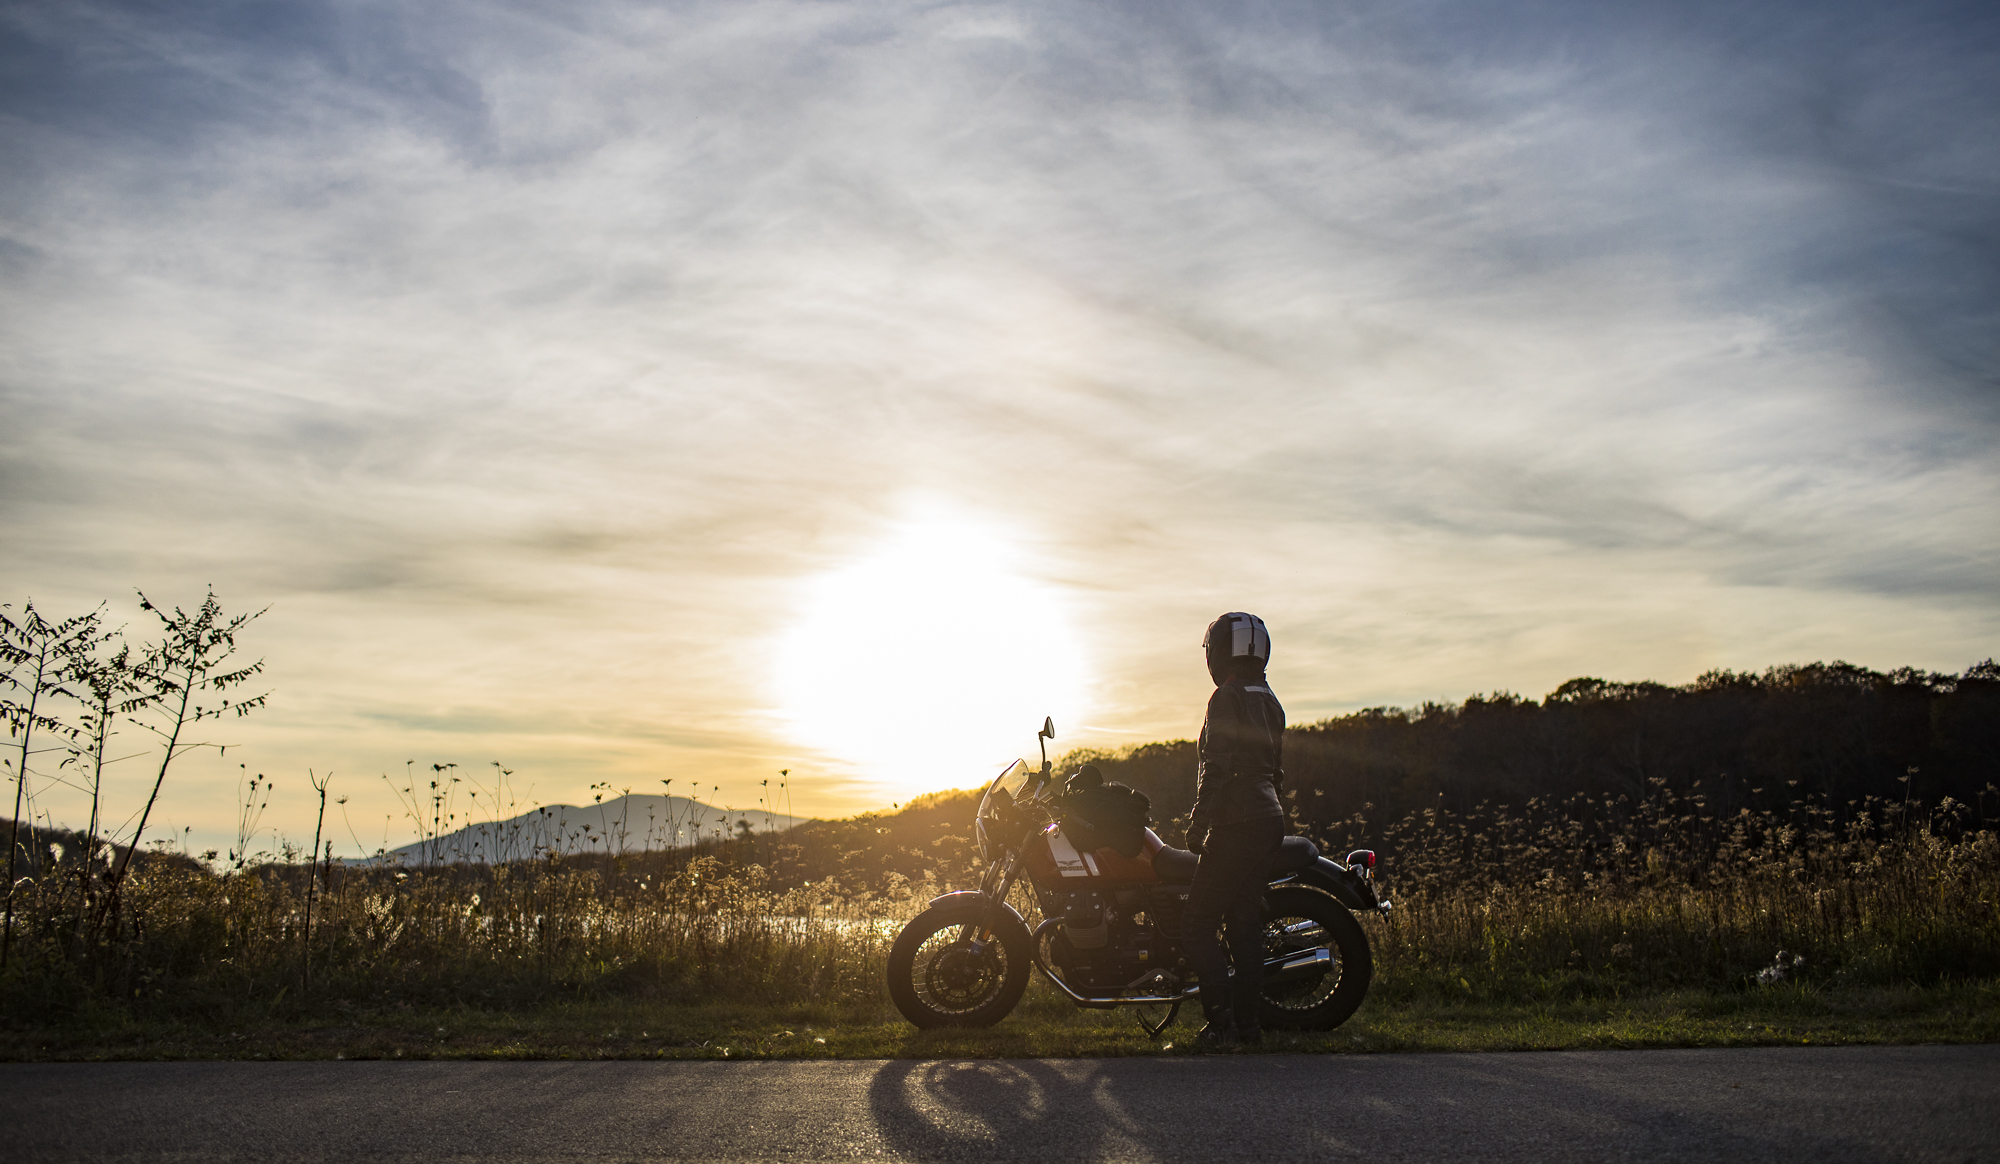 Motorcycle portrait photography for Moto Guzzi's upcoming book.